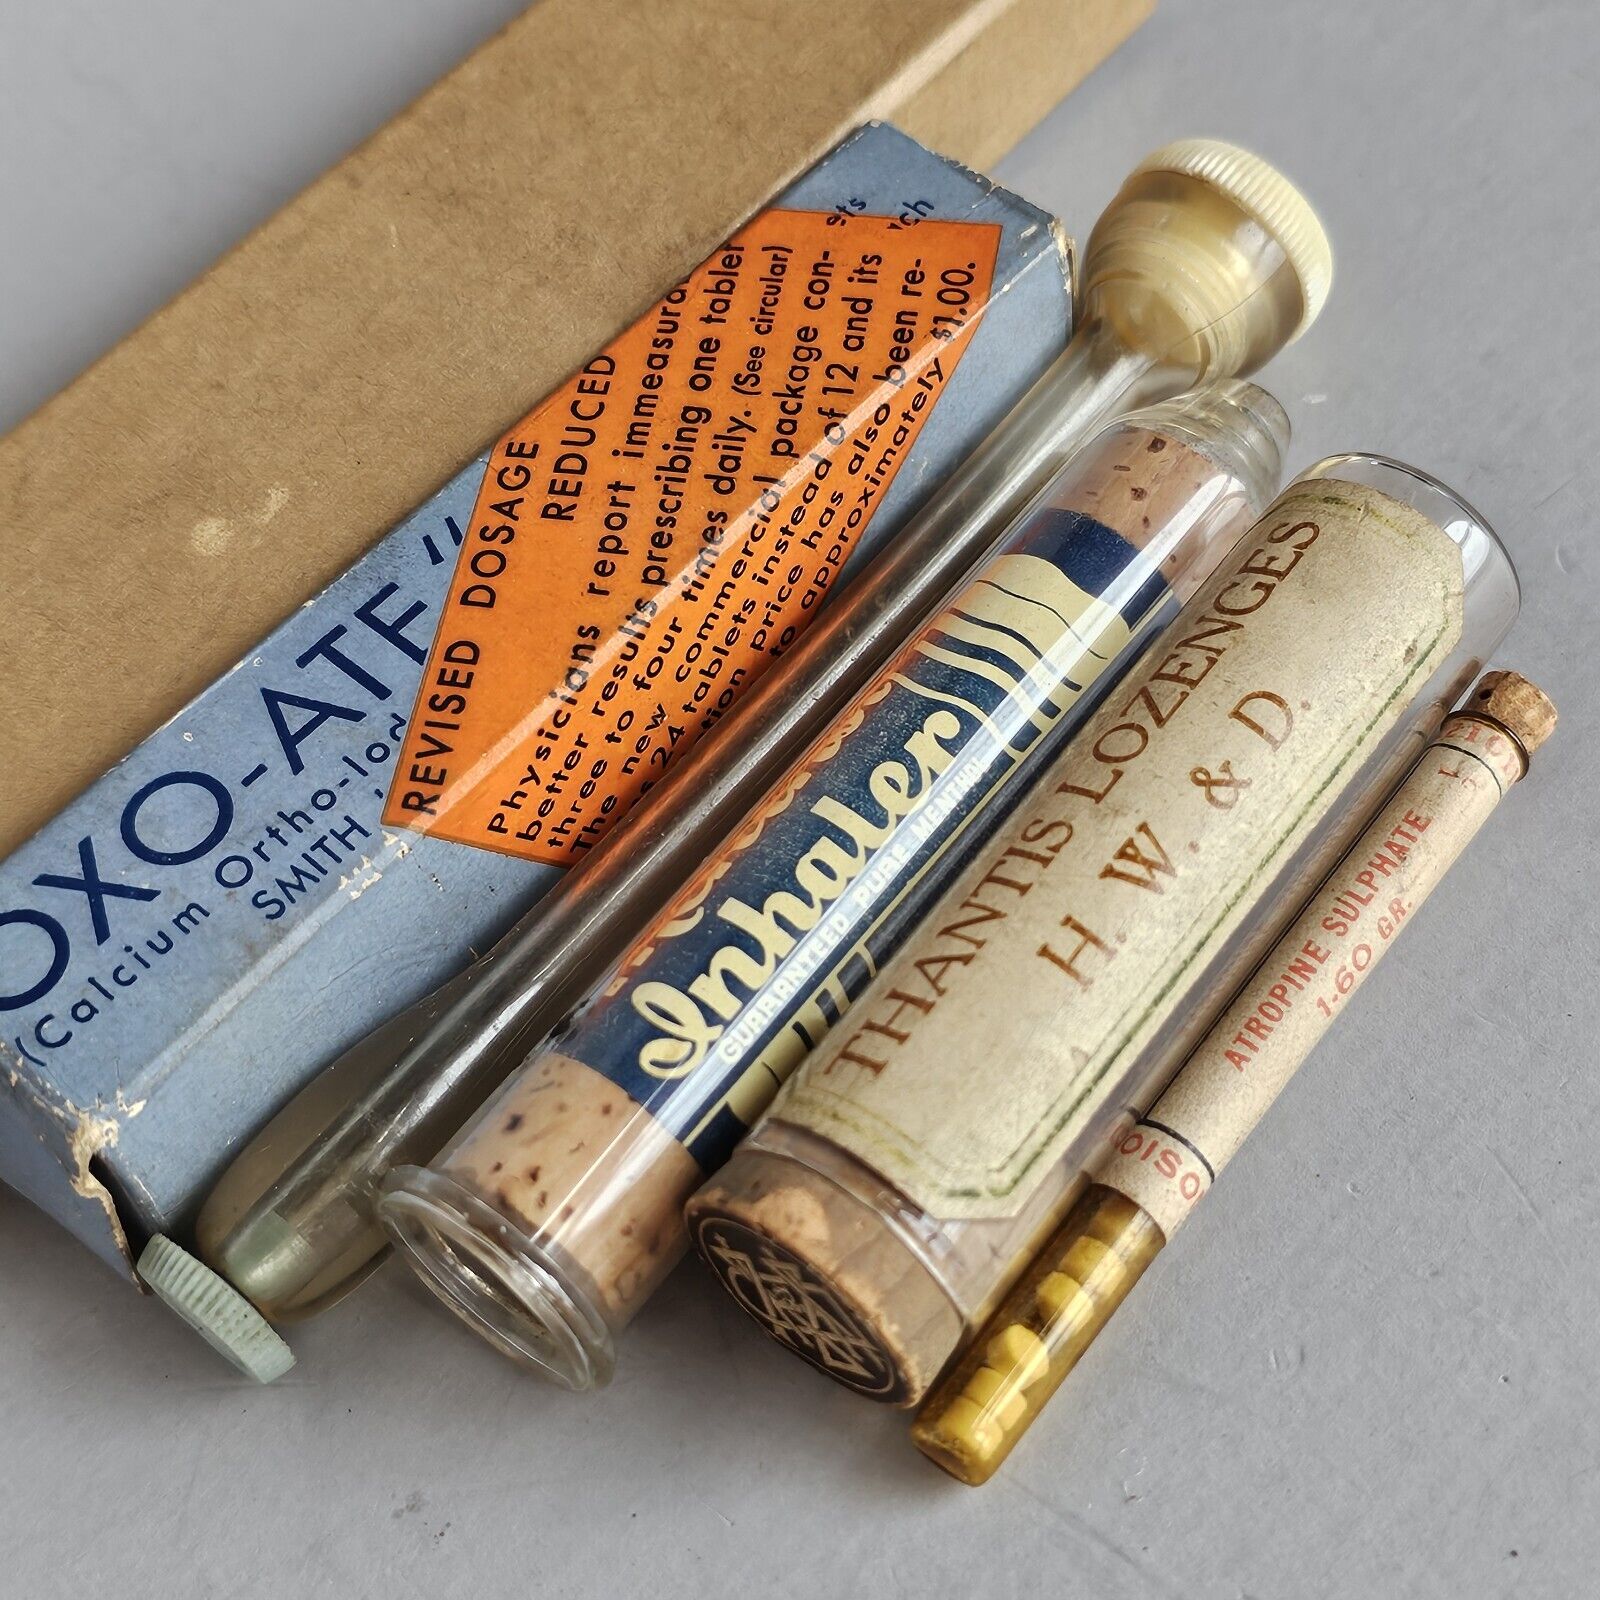 Antique Medical Products Physicians Samples Drugs 1930s Bottles, Vials